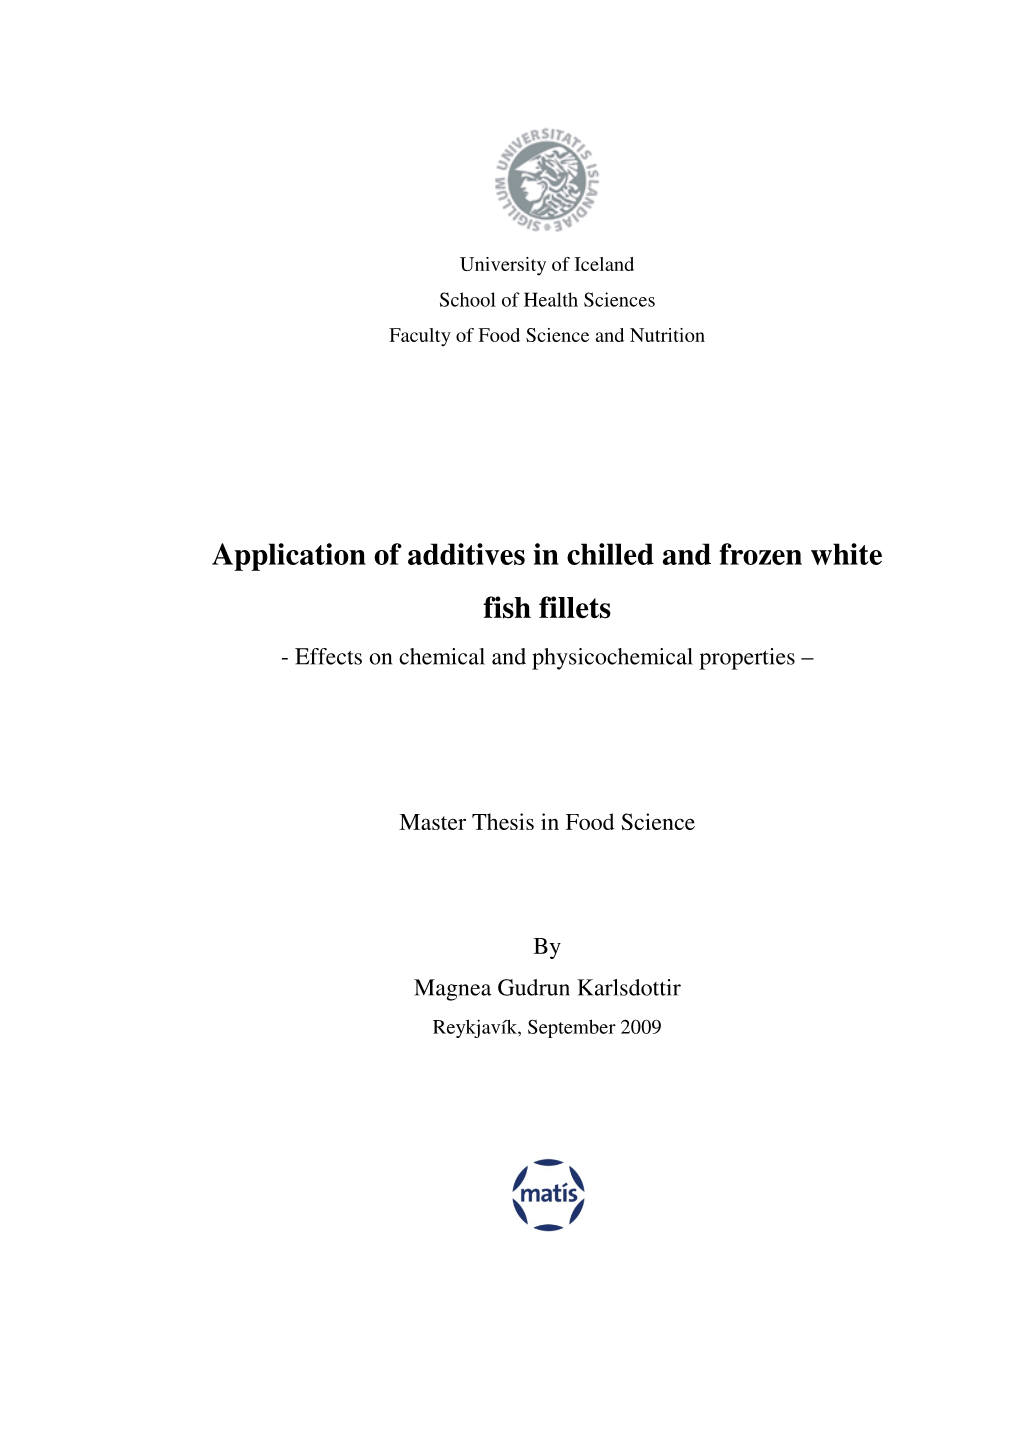 Application of Additives in Chilled and Frozen White Fish Fillets - Effects on Chemical and Physicochemical Properties –